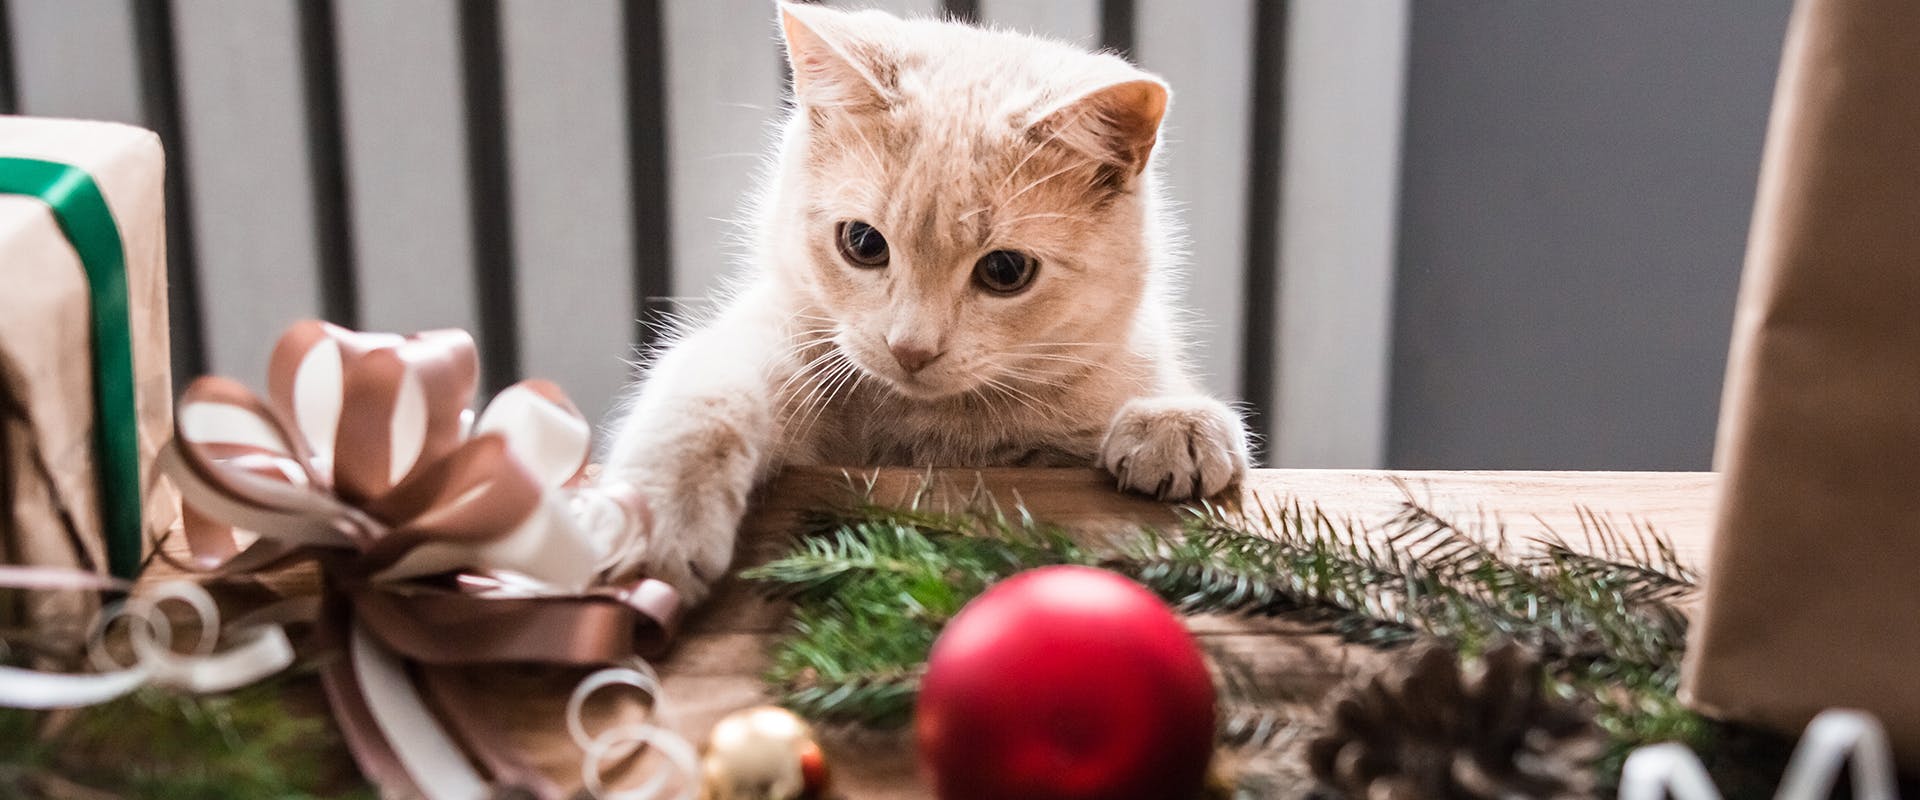 A cat pawing at some Christmas decorations